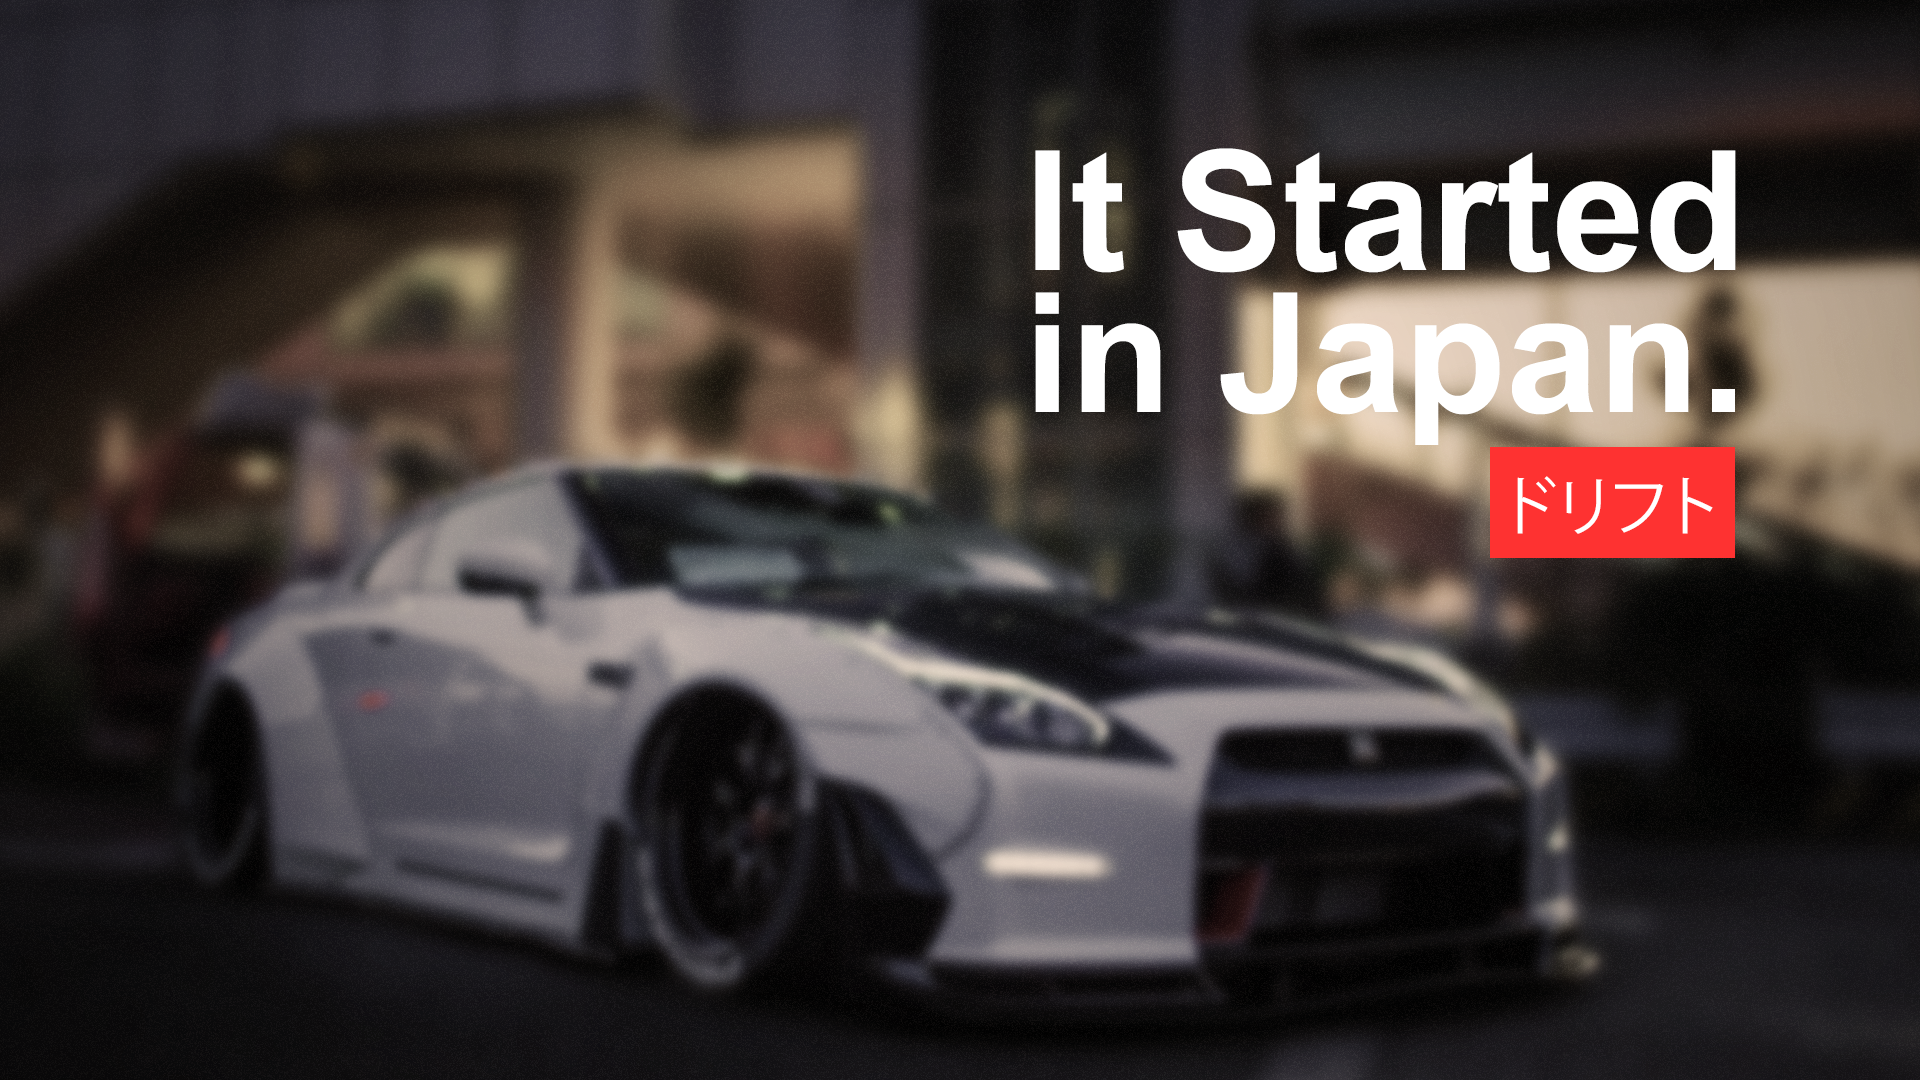 General 1920x1080 car vehicle Japanese cars tuning modified Nissan It Started in Japan Nissan GT-R bodykit